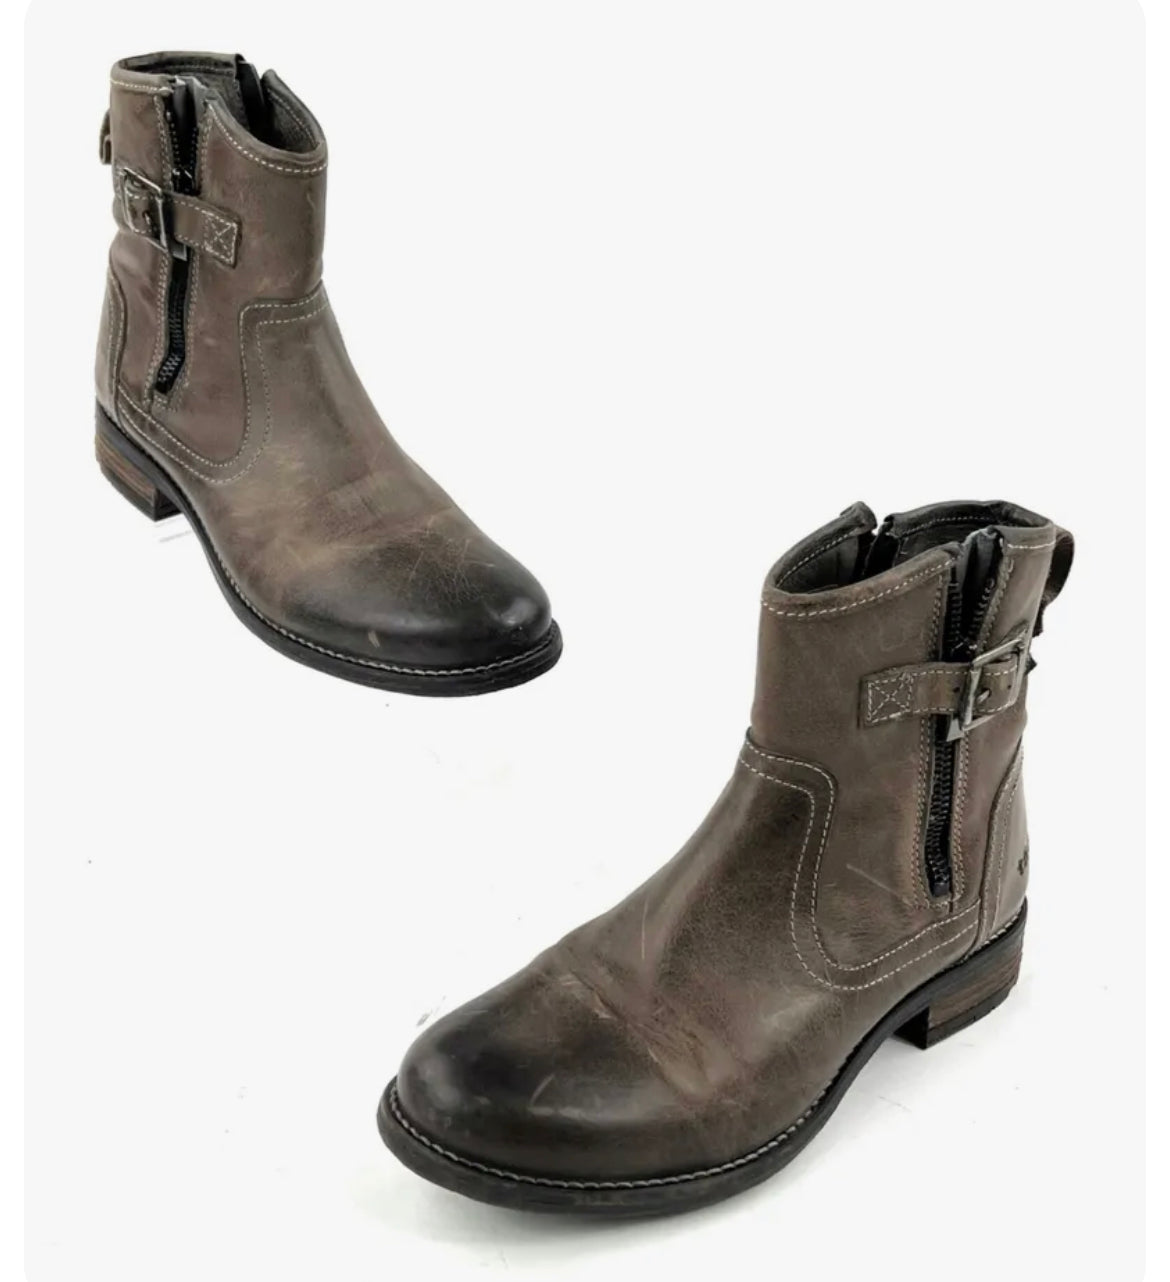 Taos Convoy Grey Ladies Boot - All Mixed Up 